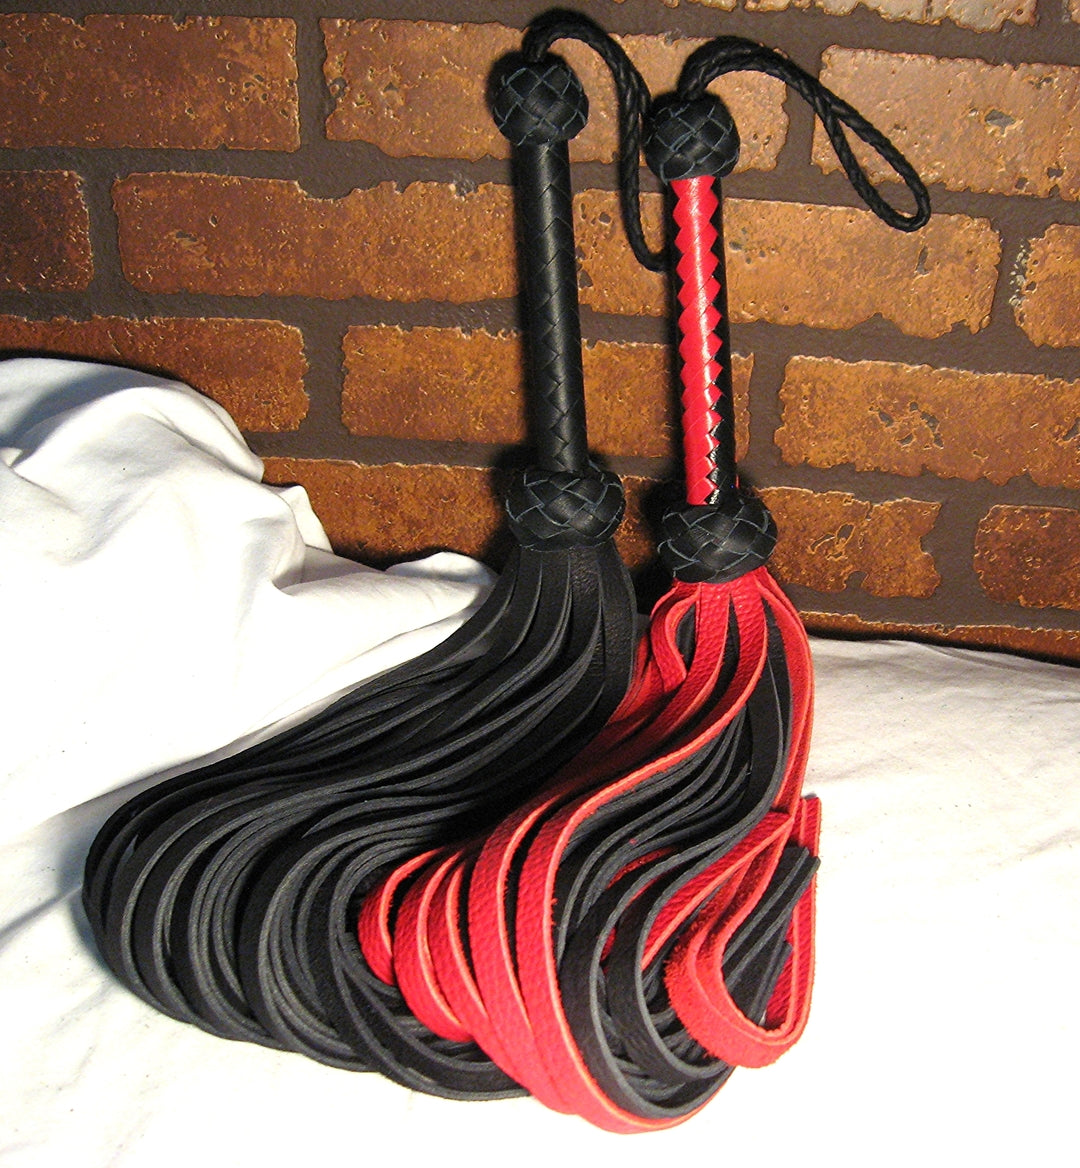 A black buffalo flogger and a red buffalo flogger sitting up side by side against a brick wall background.